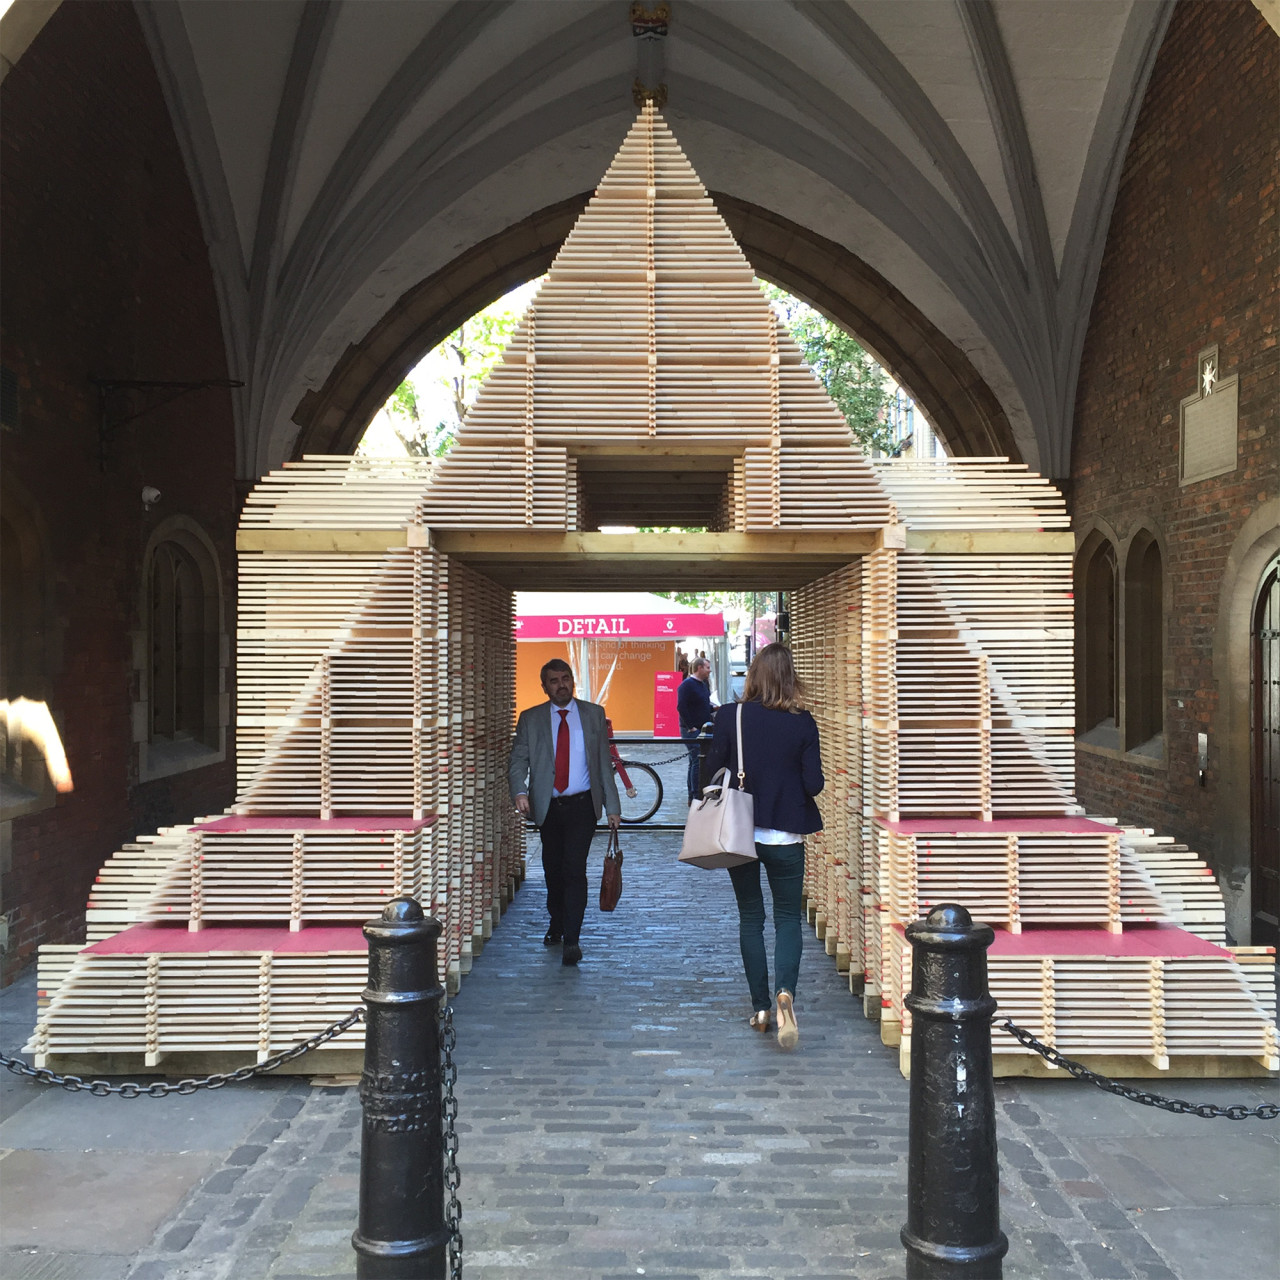 CDW16: Exploring Clerkenwell From Top to Bottom